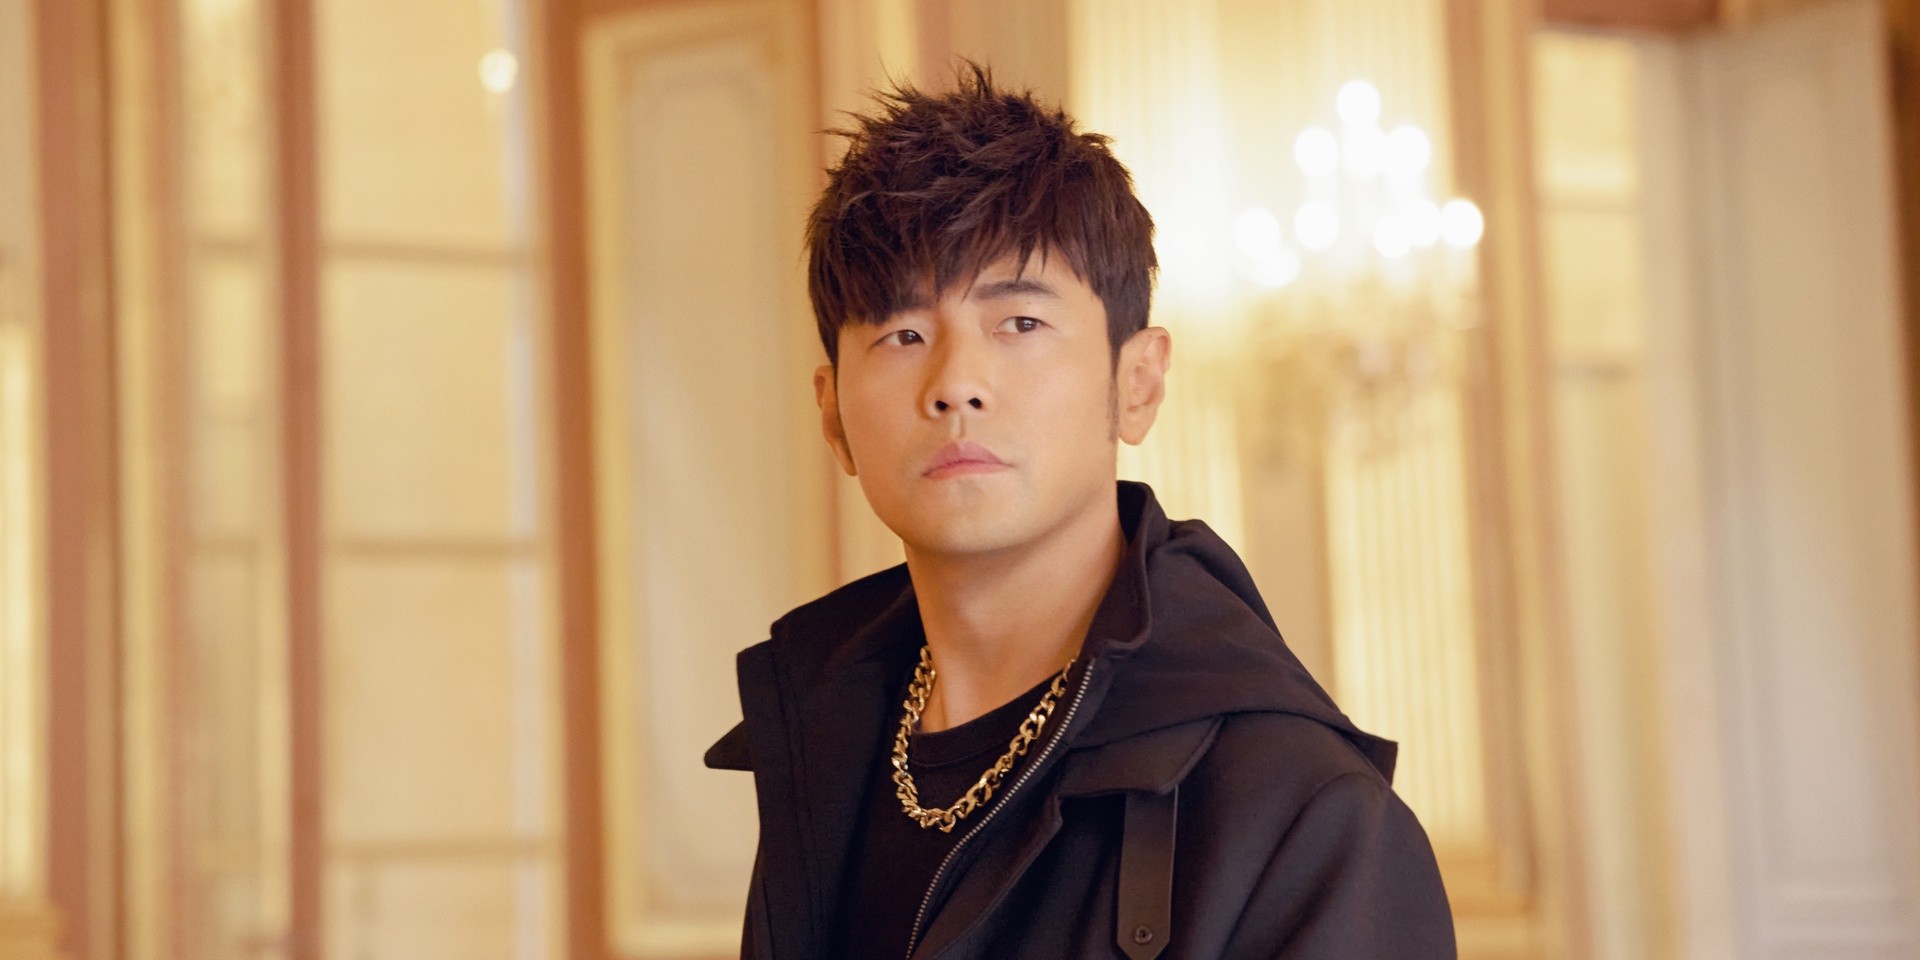 Jay Chou and Spotify collaborate on Enhanced Album edition of 'Greatest Works of Art' – listen